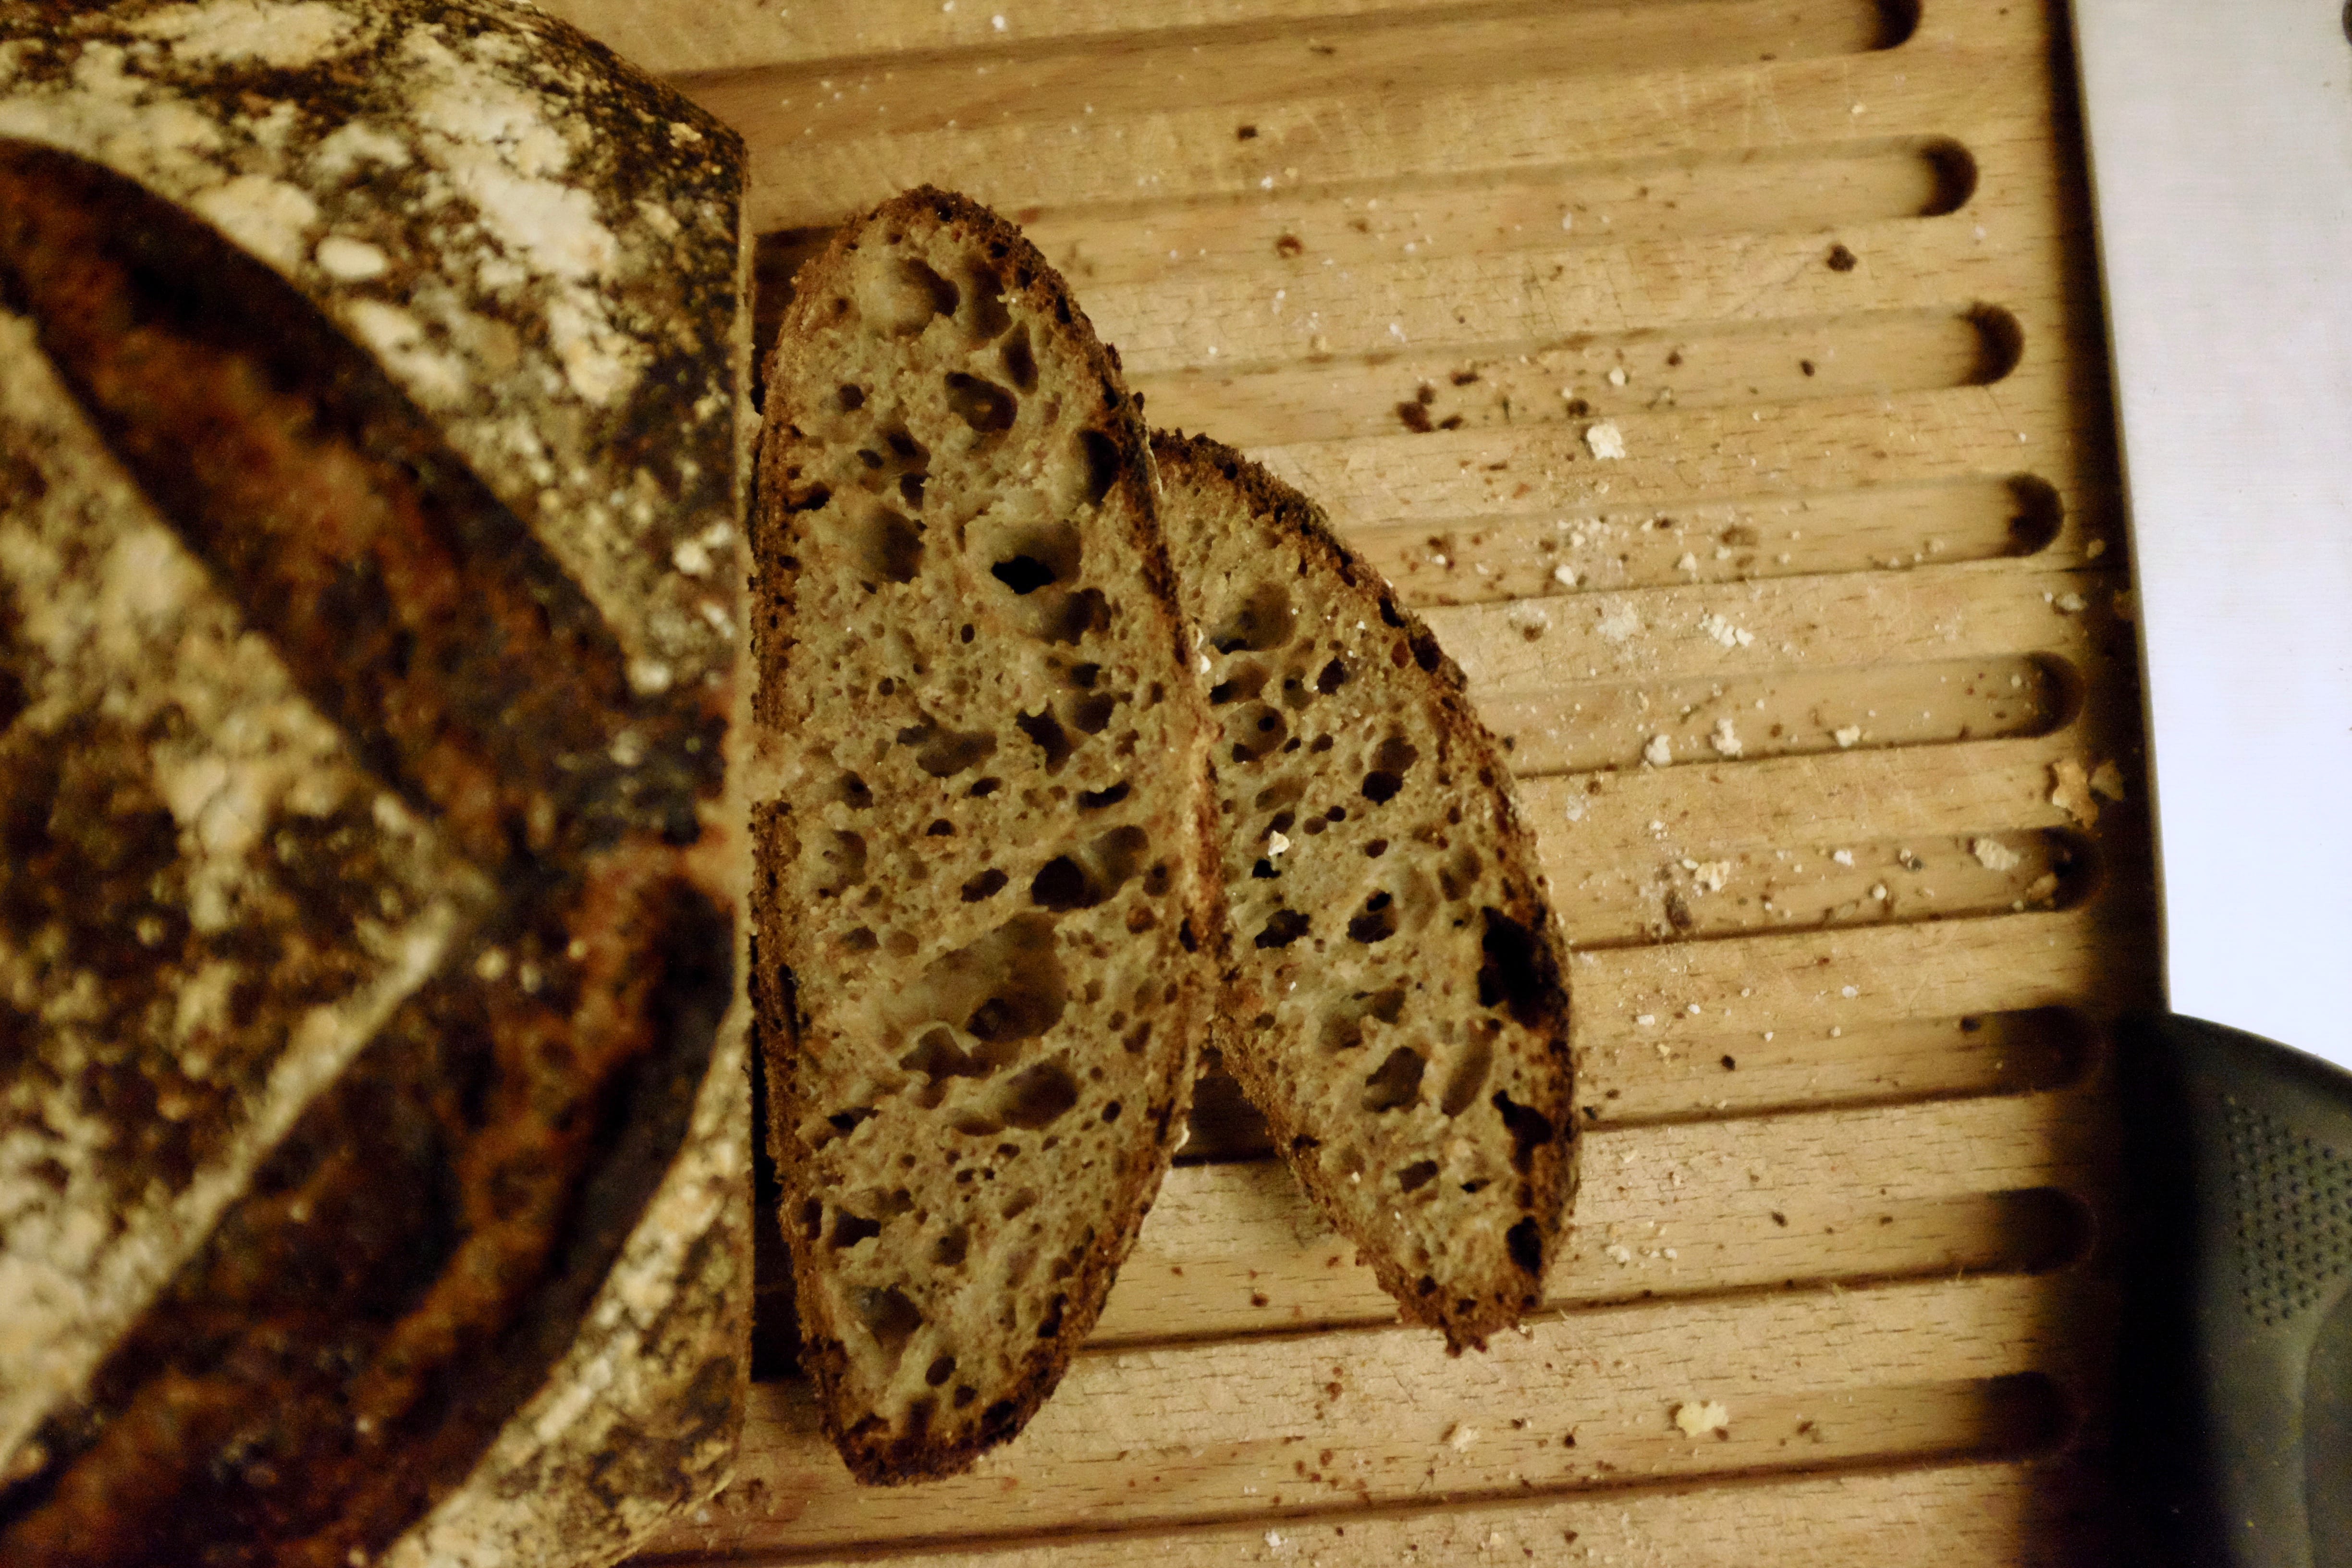 Two slices of bread, showing the inside crumb